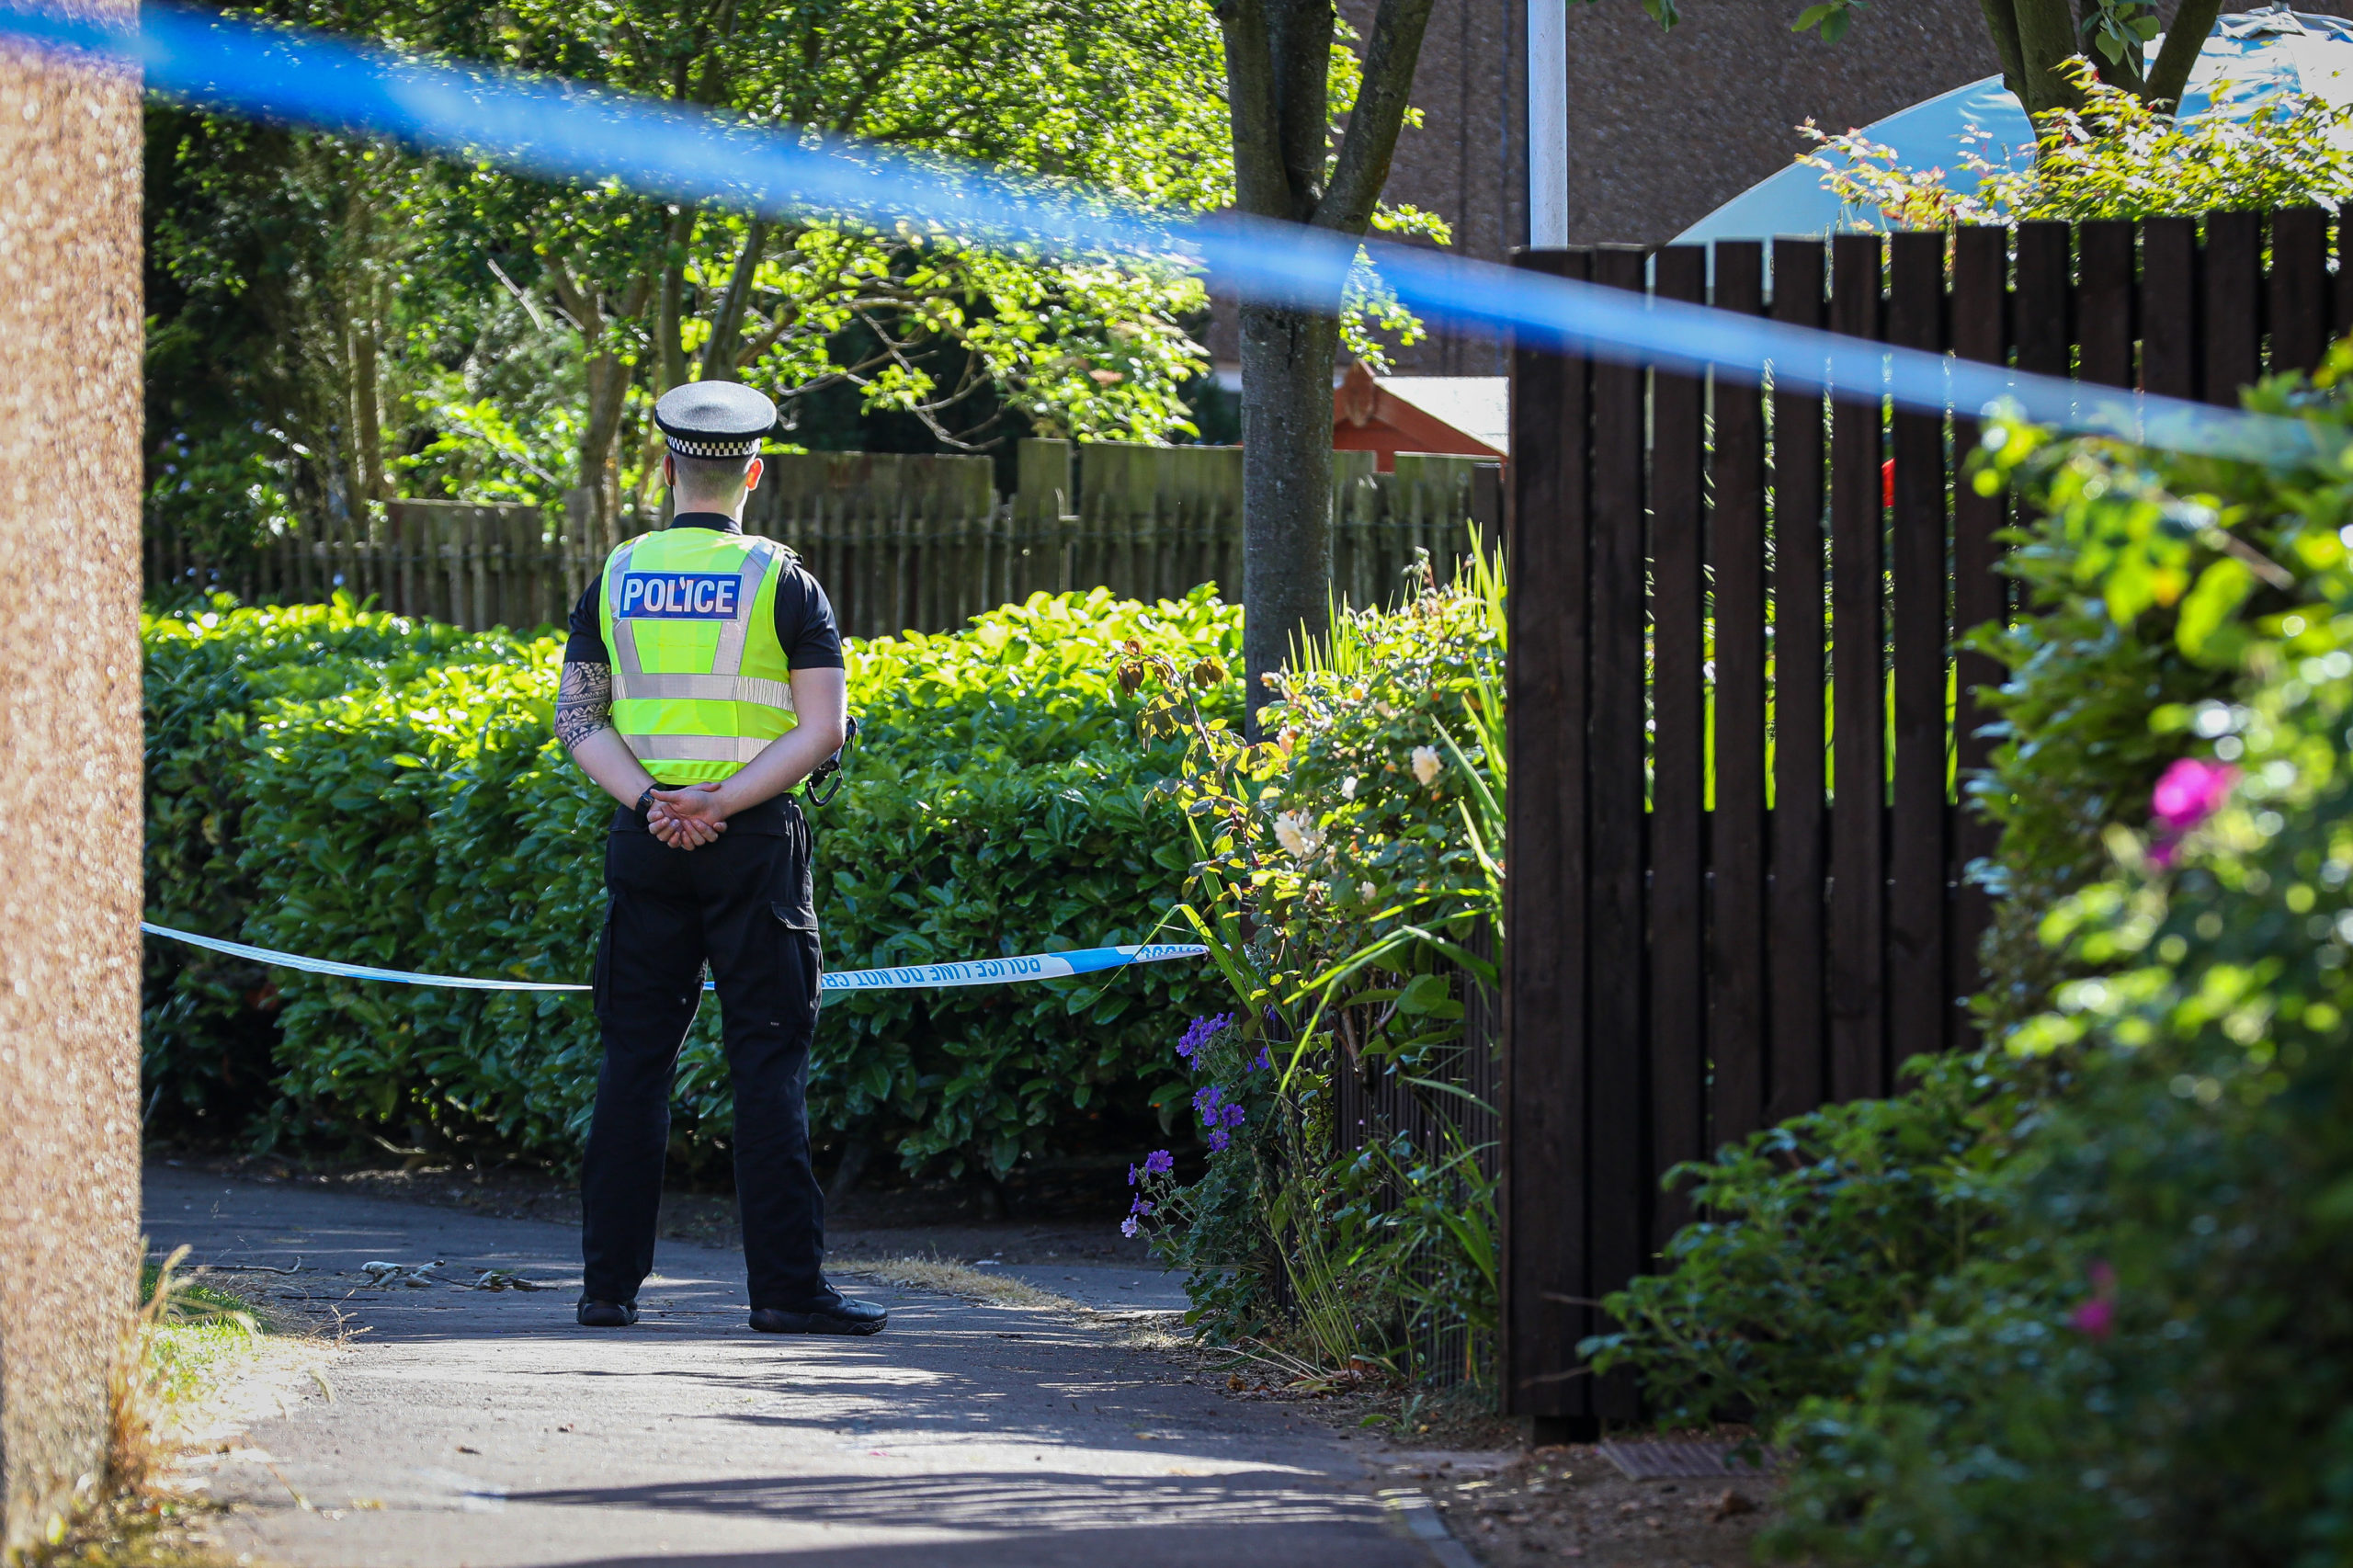 An officer guards the property in Meldrum Gardens, Glenrothes where the 83-year-old was attacked.